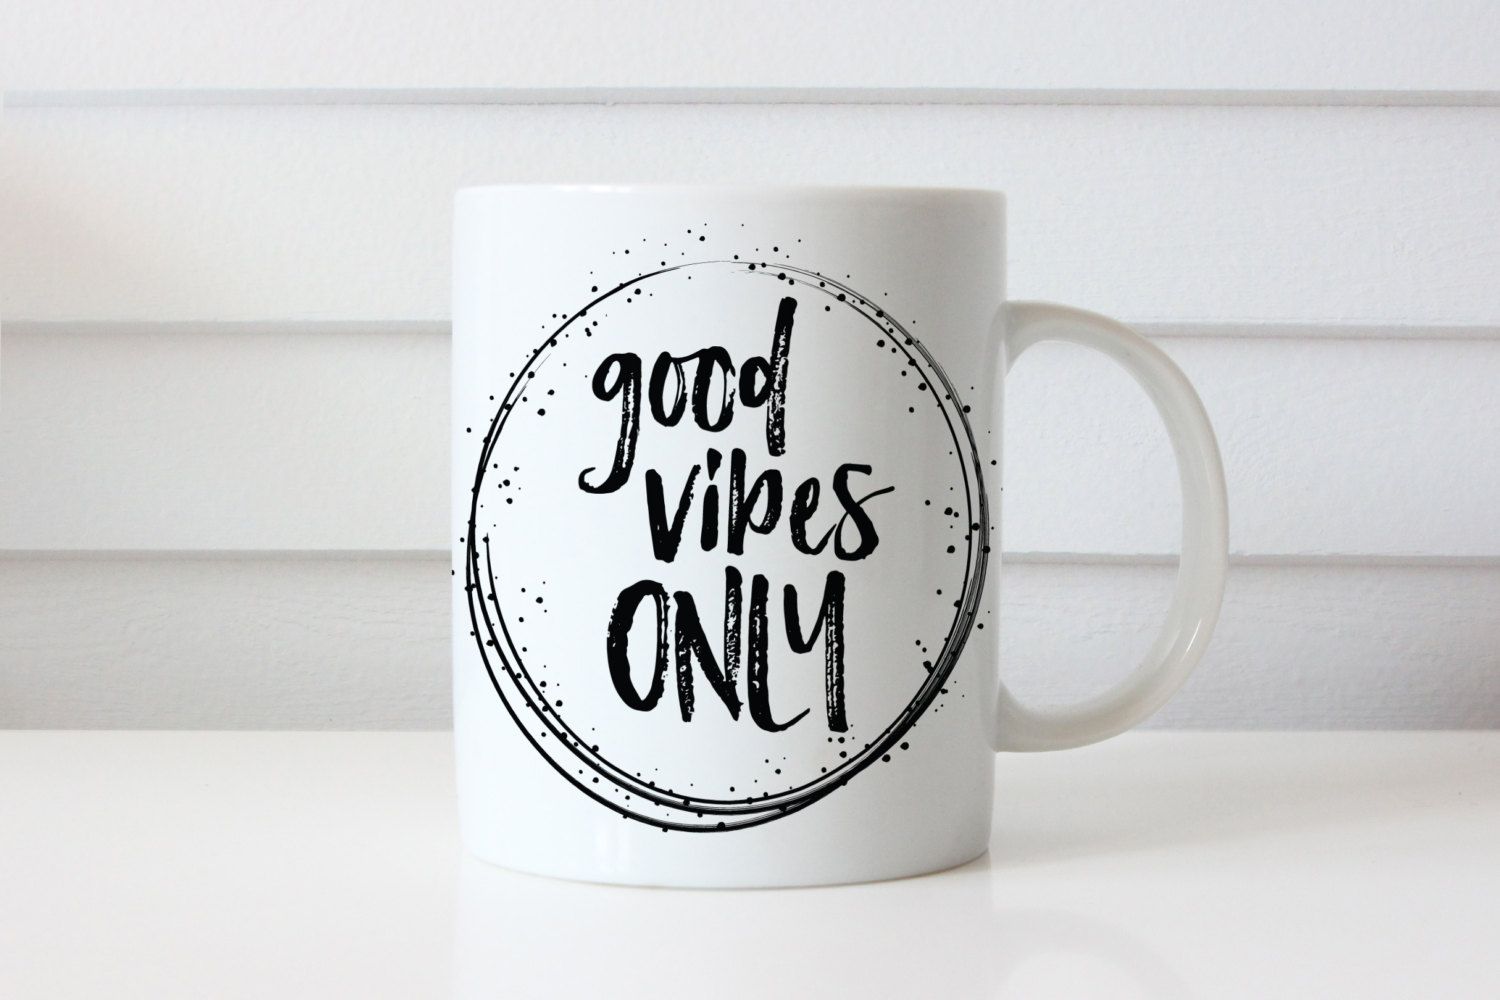 Good Vibes Only motivational mug from Heart & Willow Prints on Etsy